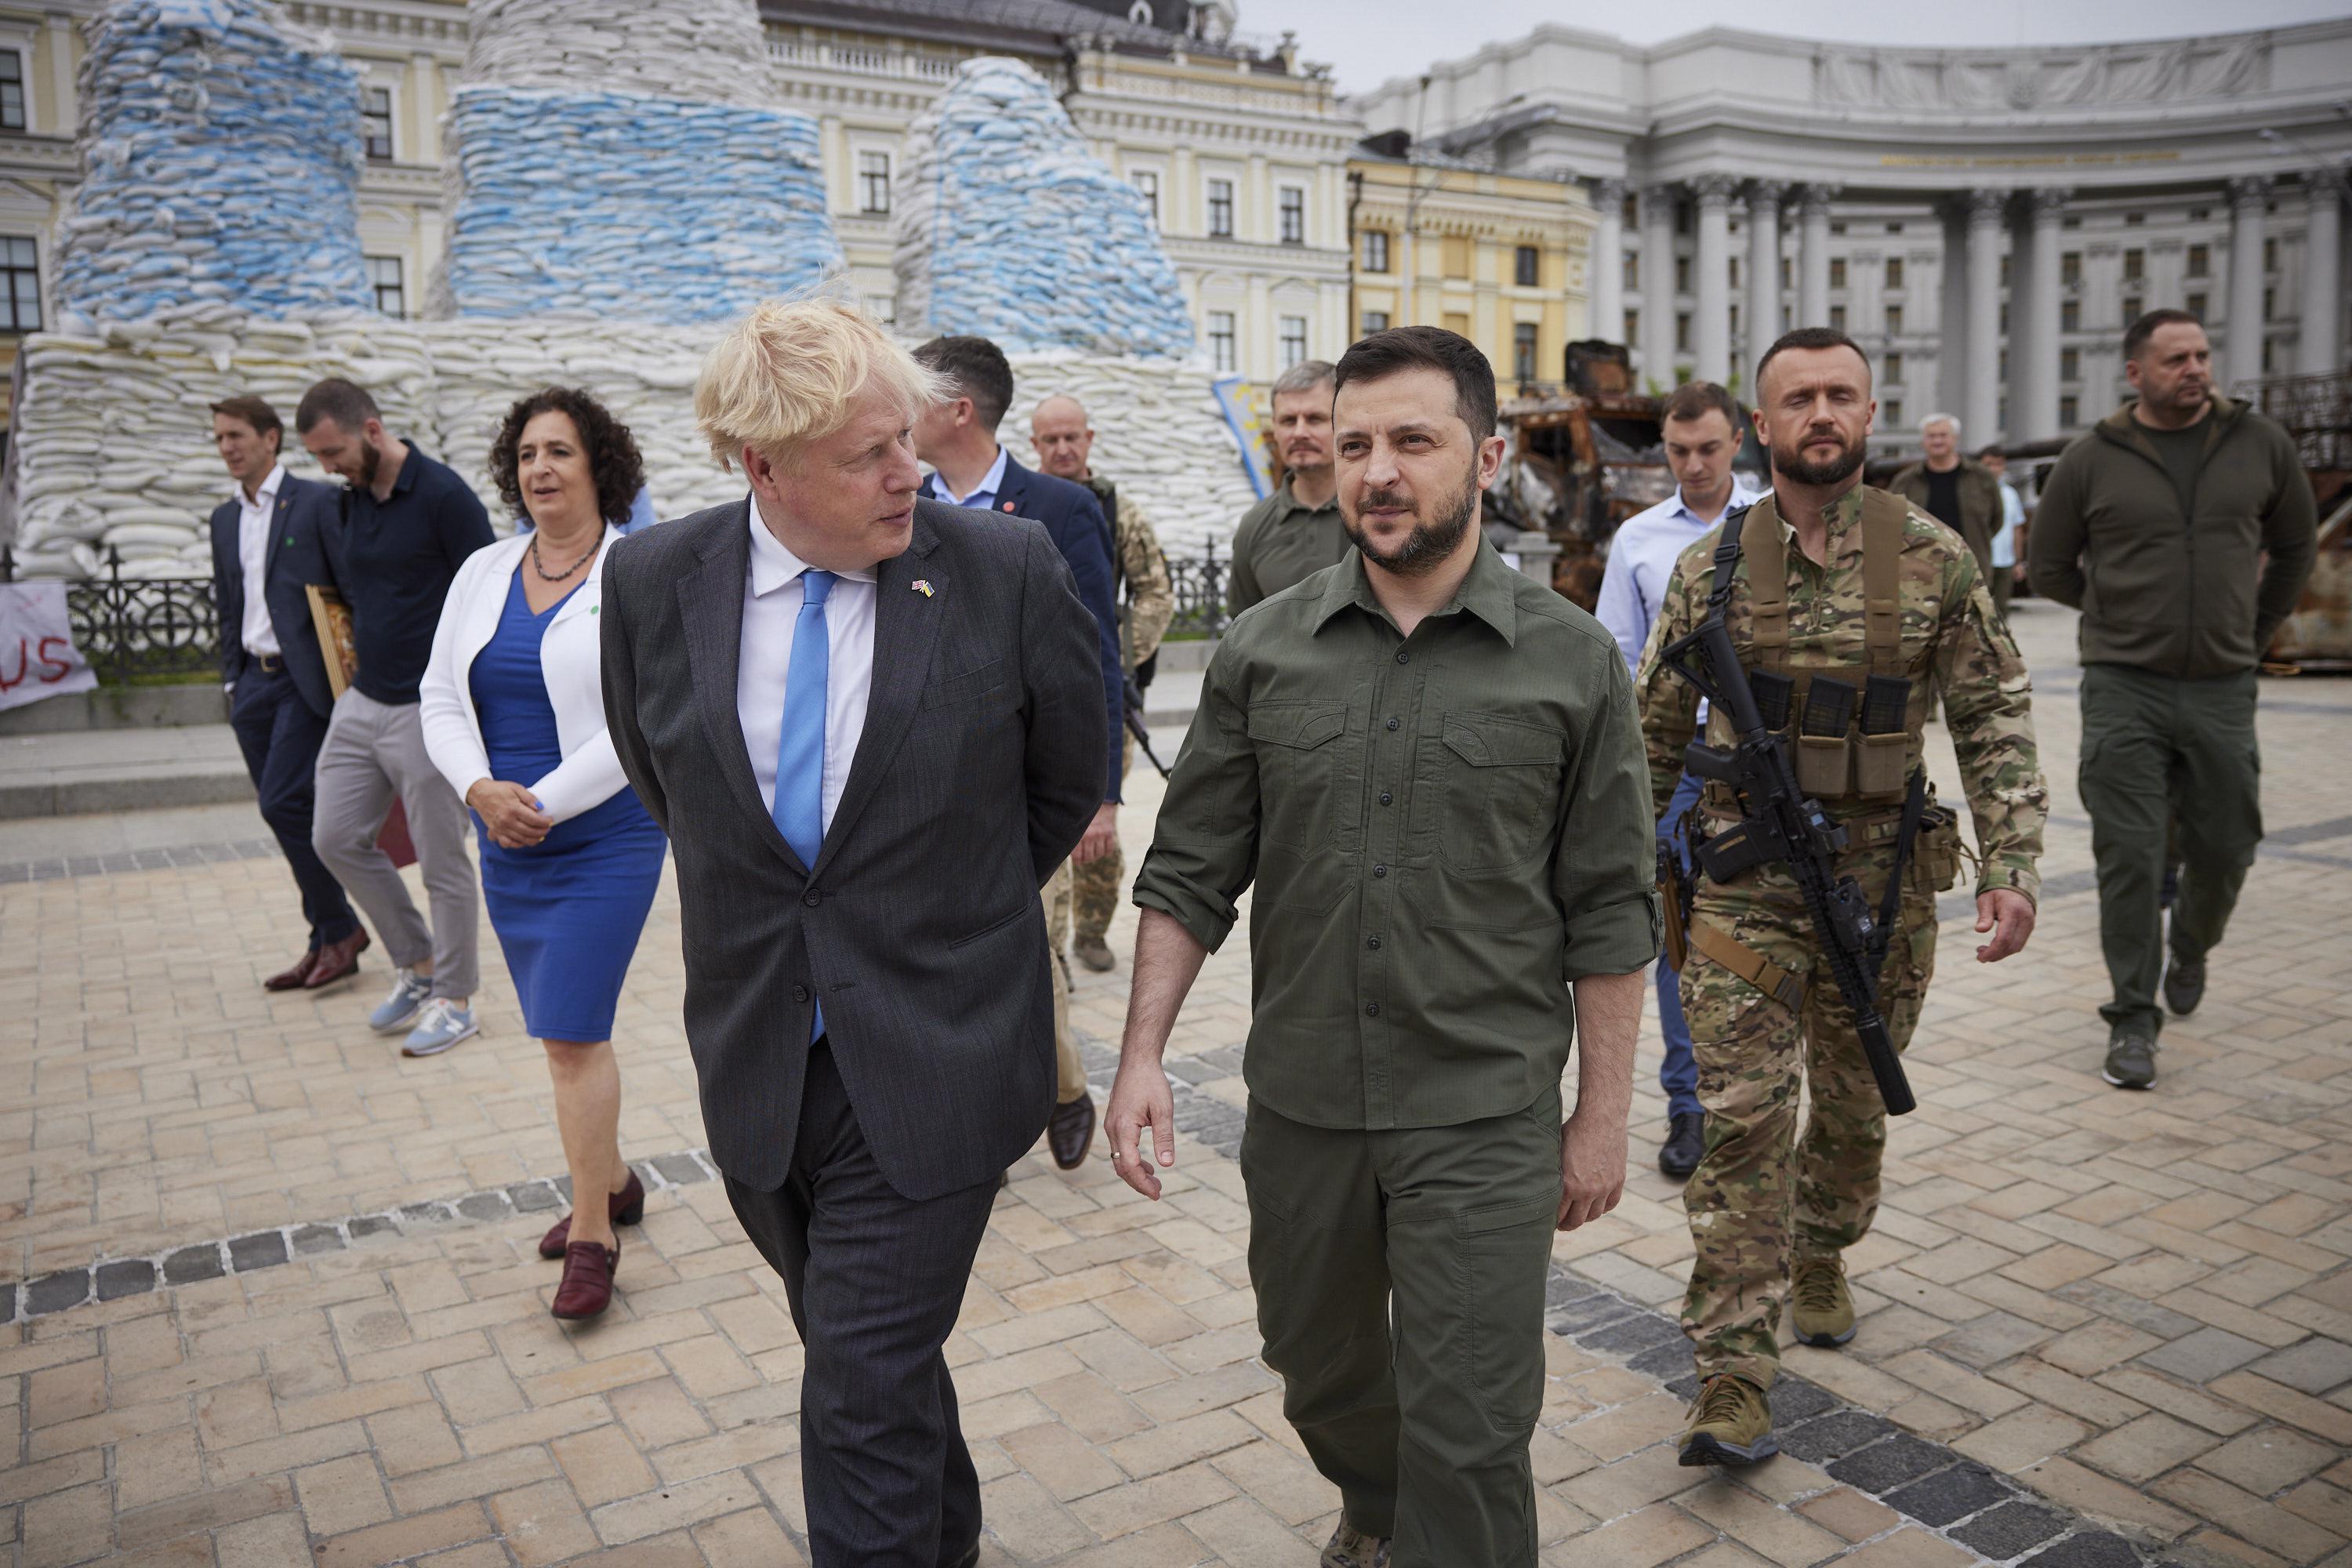 The prime minister visited Kyiv on Friday to discuss military support with Volodymyr Zelensky